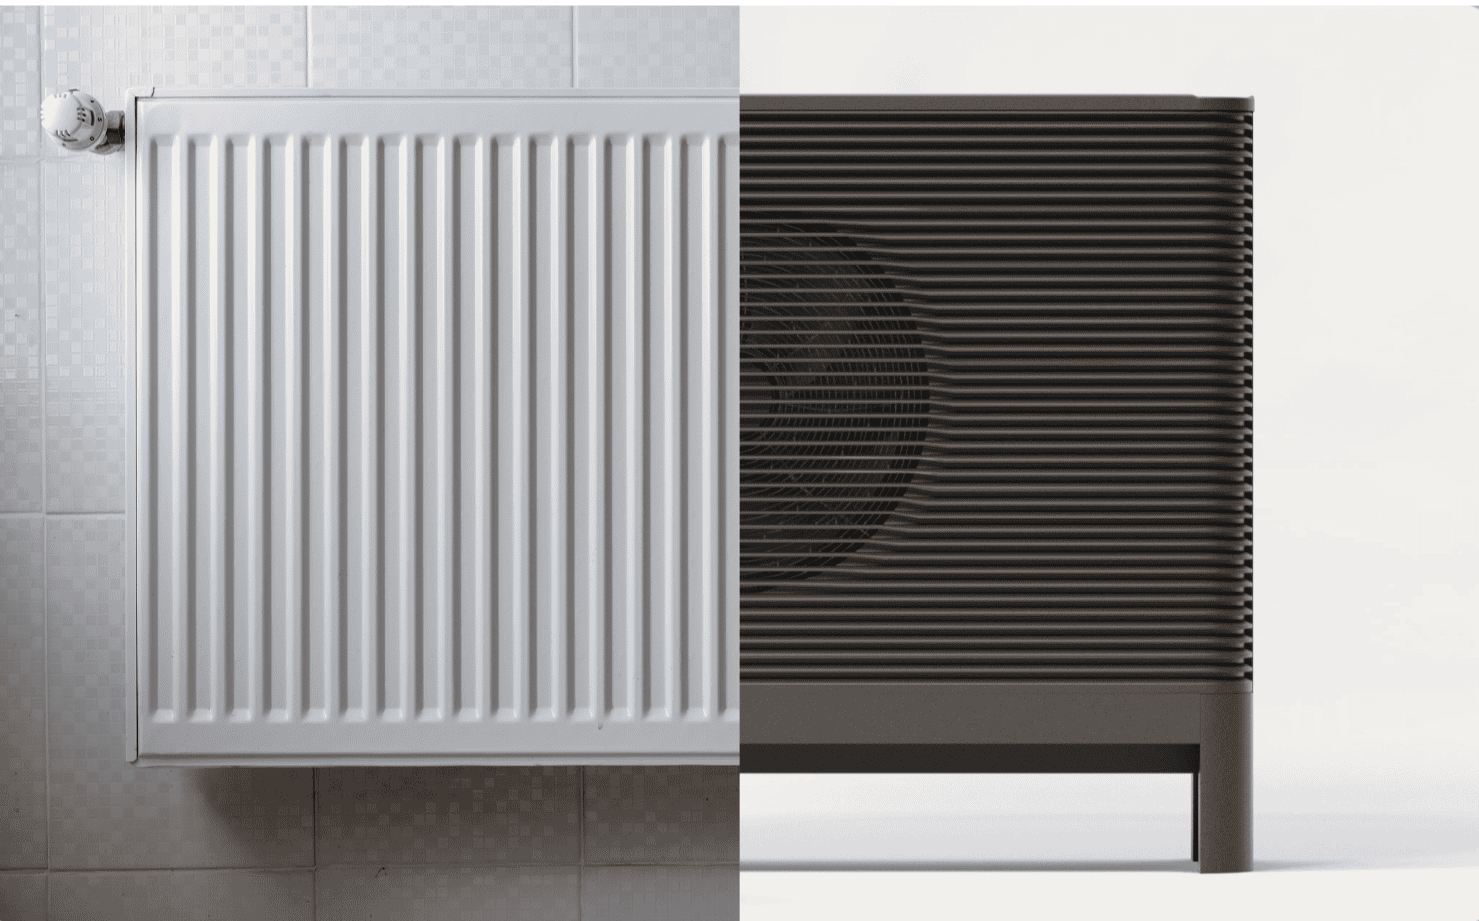 Picture of half a radiator and half an Aira Heat Pump split down the middle of the page